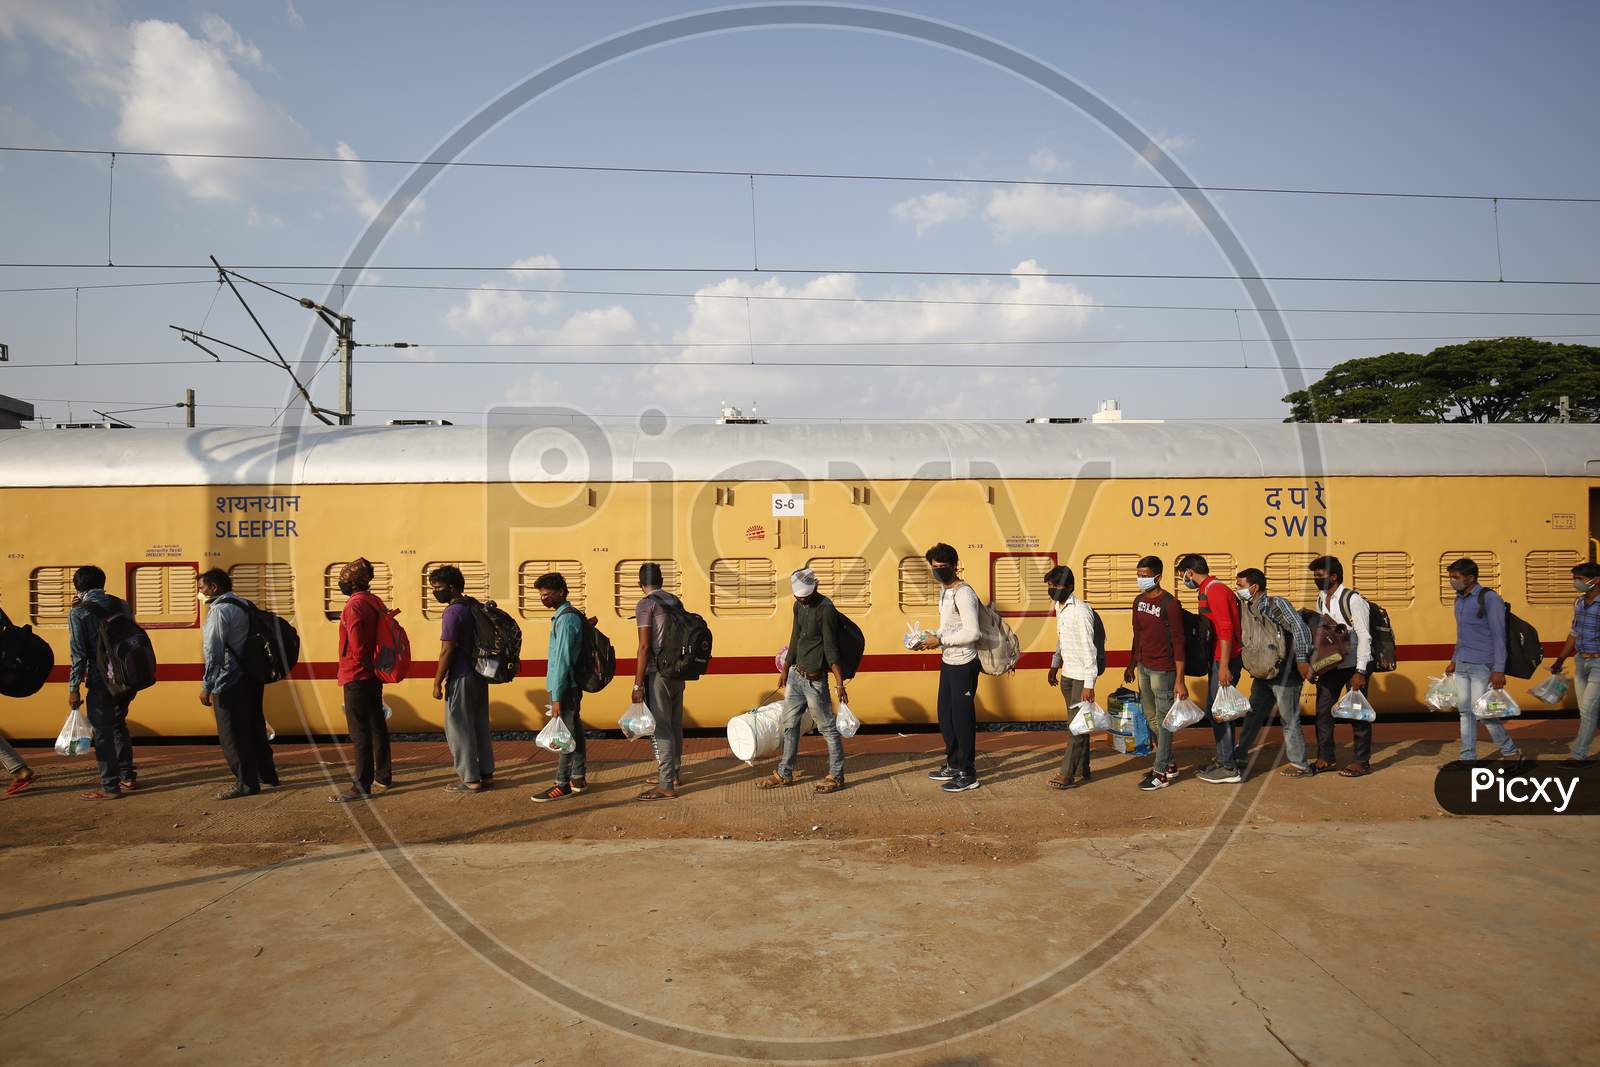 Men queue to board a train to travel to Danapur, Bihar in a special train arranged by the government to repatriate migrant workers at the Chikkabanavara Junction Railway Station on the outskirts of Bangalore, India.